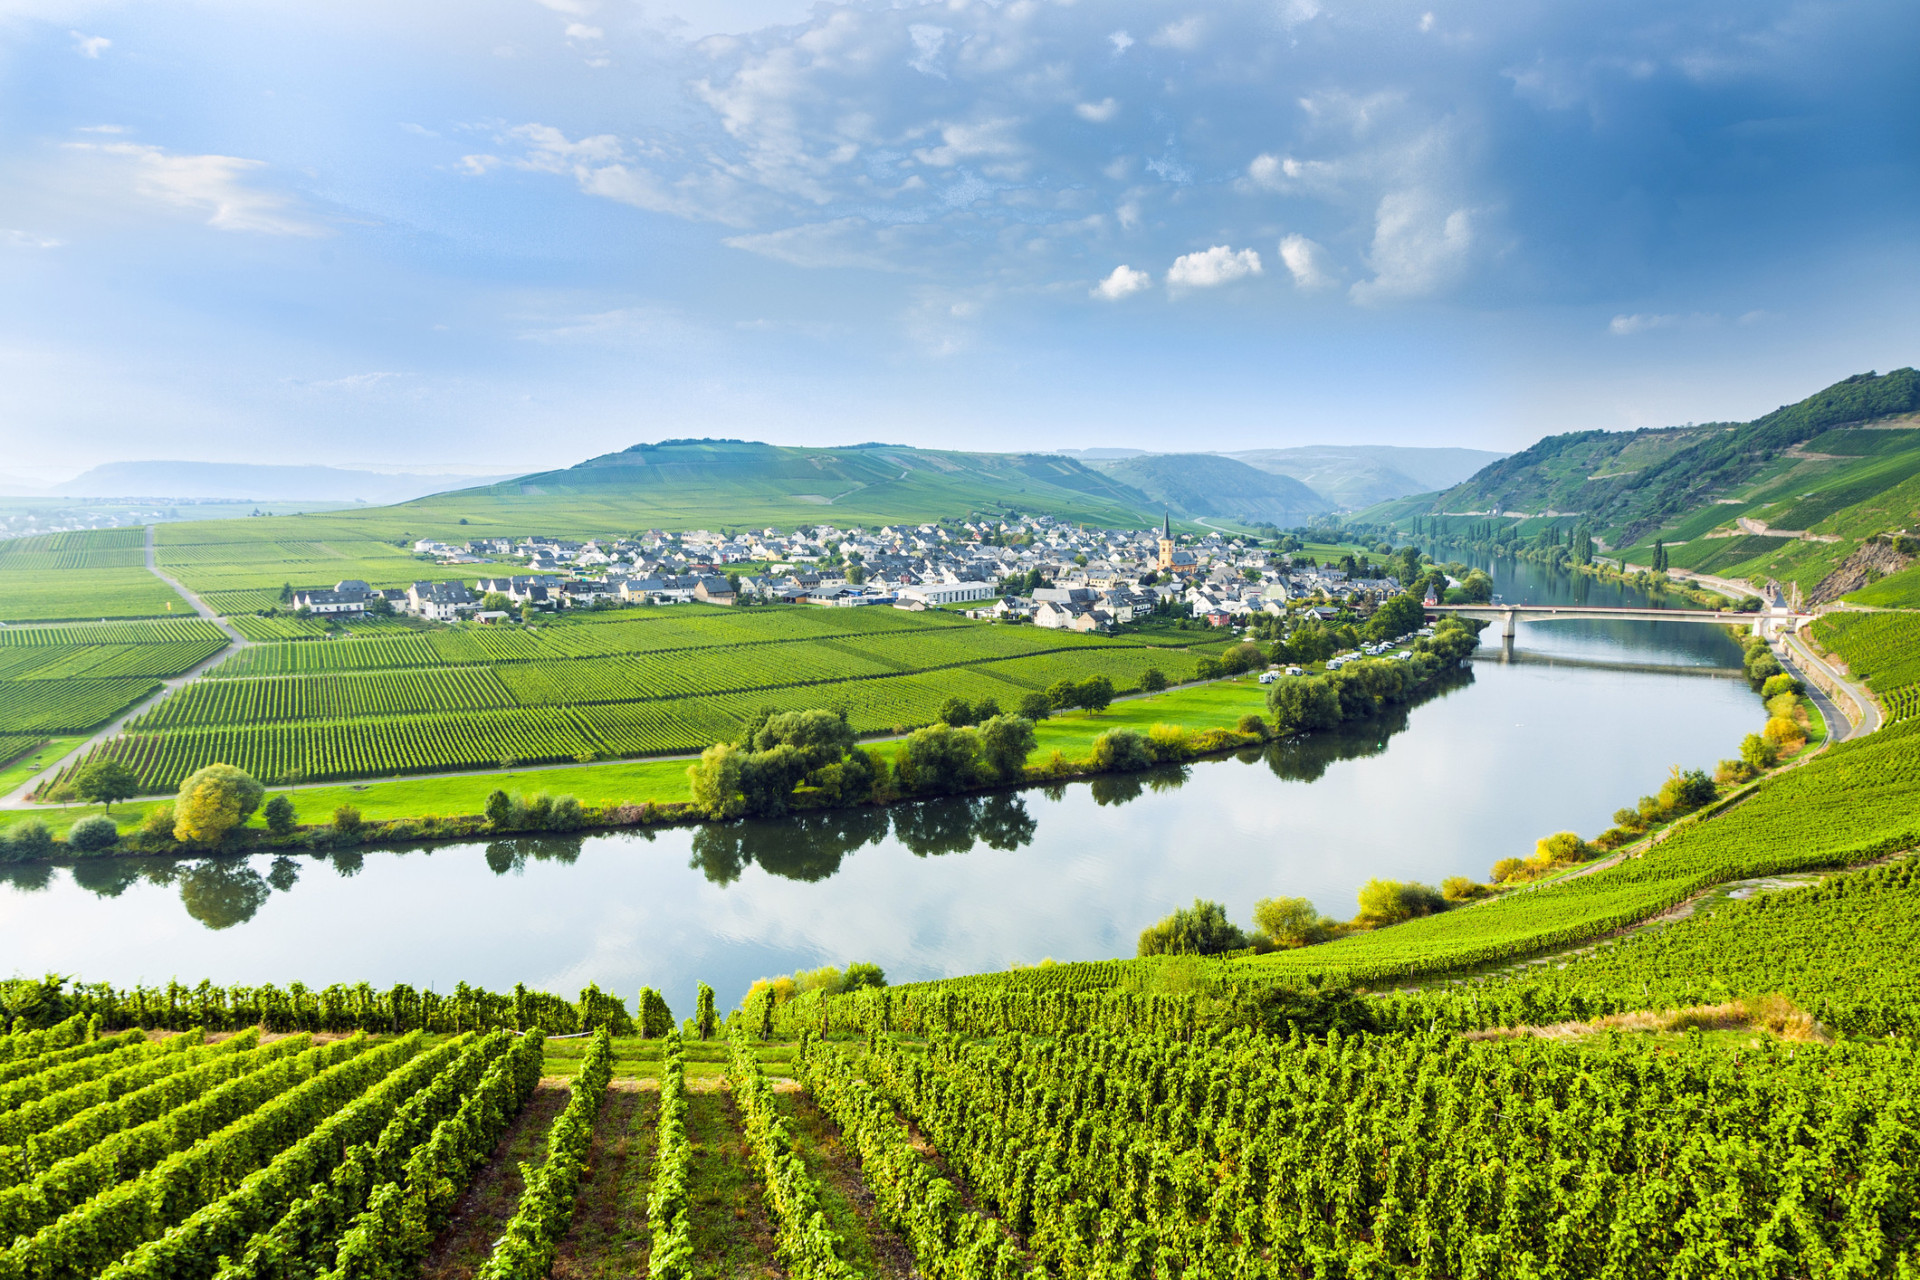 Taking its name from the River Mosel, this is arguably Germany's leading wine region. Convivial wine tastings can be enjoyed along the meandering wine route.<p><a href="https://www.msn.com/en-us/community/channel/vid-7xx8mnucu55yw63we9va2gwr7uihbxwc68fxqp25x6tg4ftibpra?cvid=94631541bc0f4f89bfd59158d696ad7e">Follow us and access great exclusive content every day</a></p>